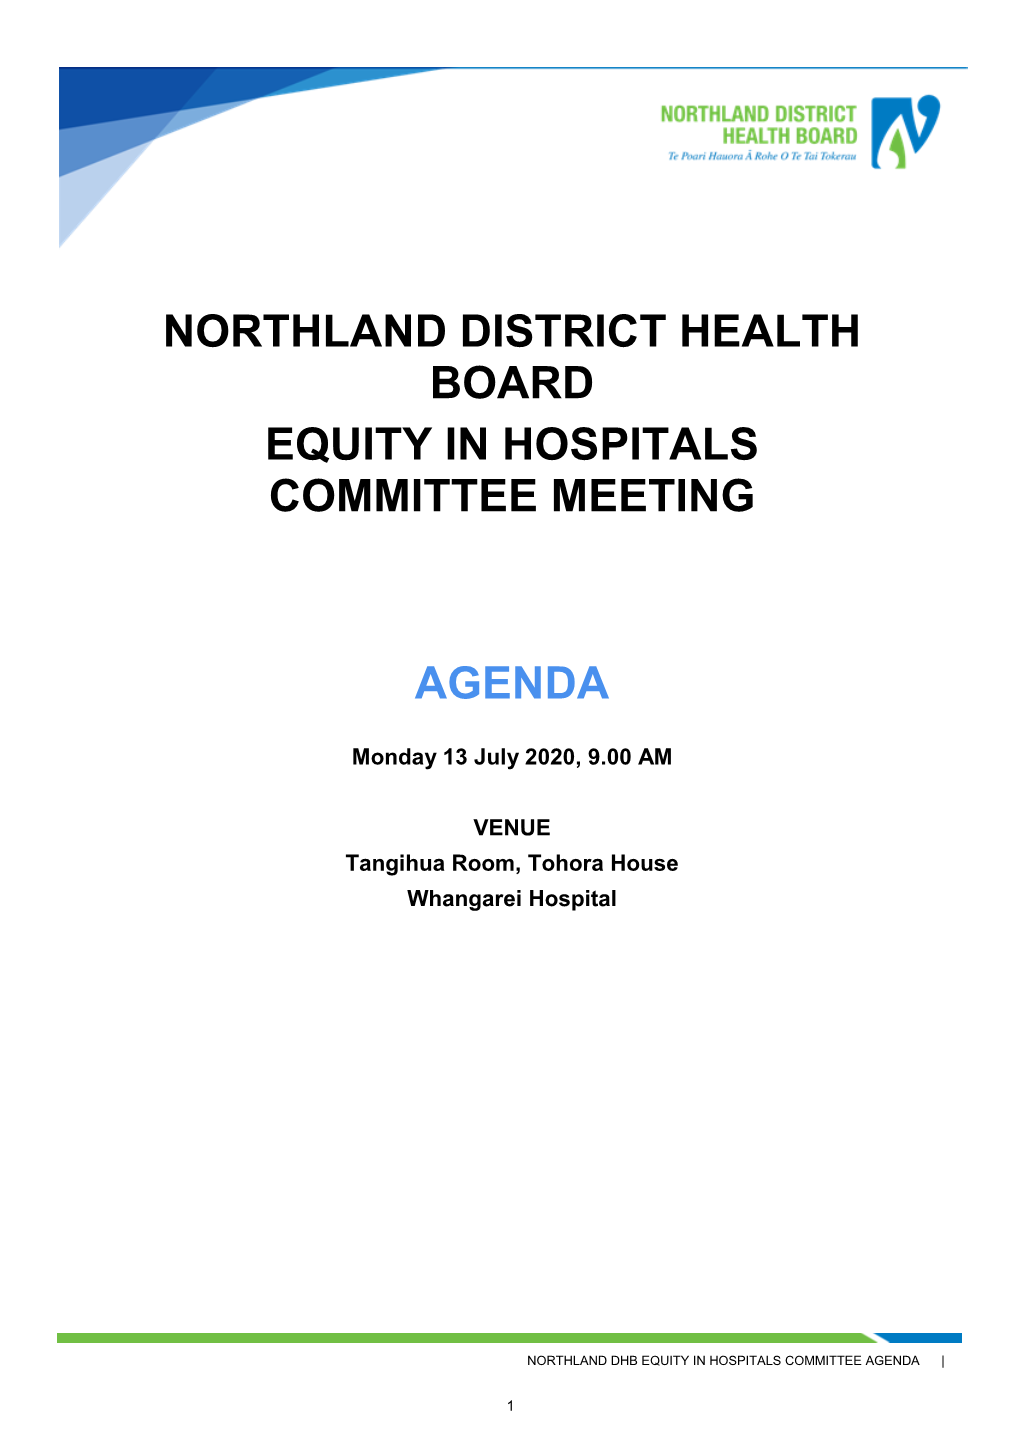 Northland District Health Board Equity in Hospitals Committee Meeting